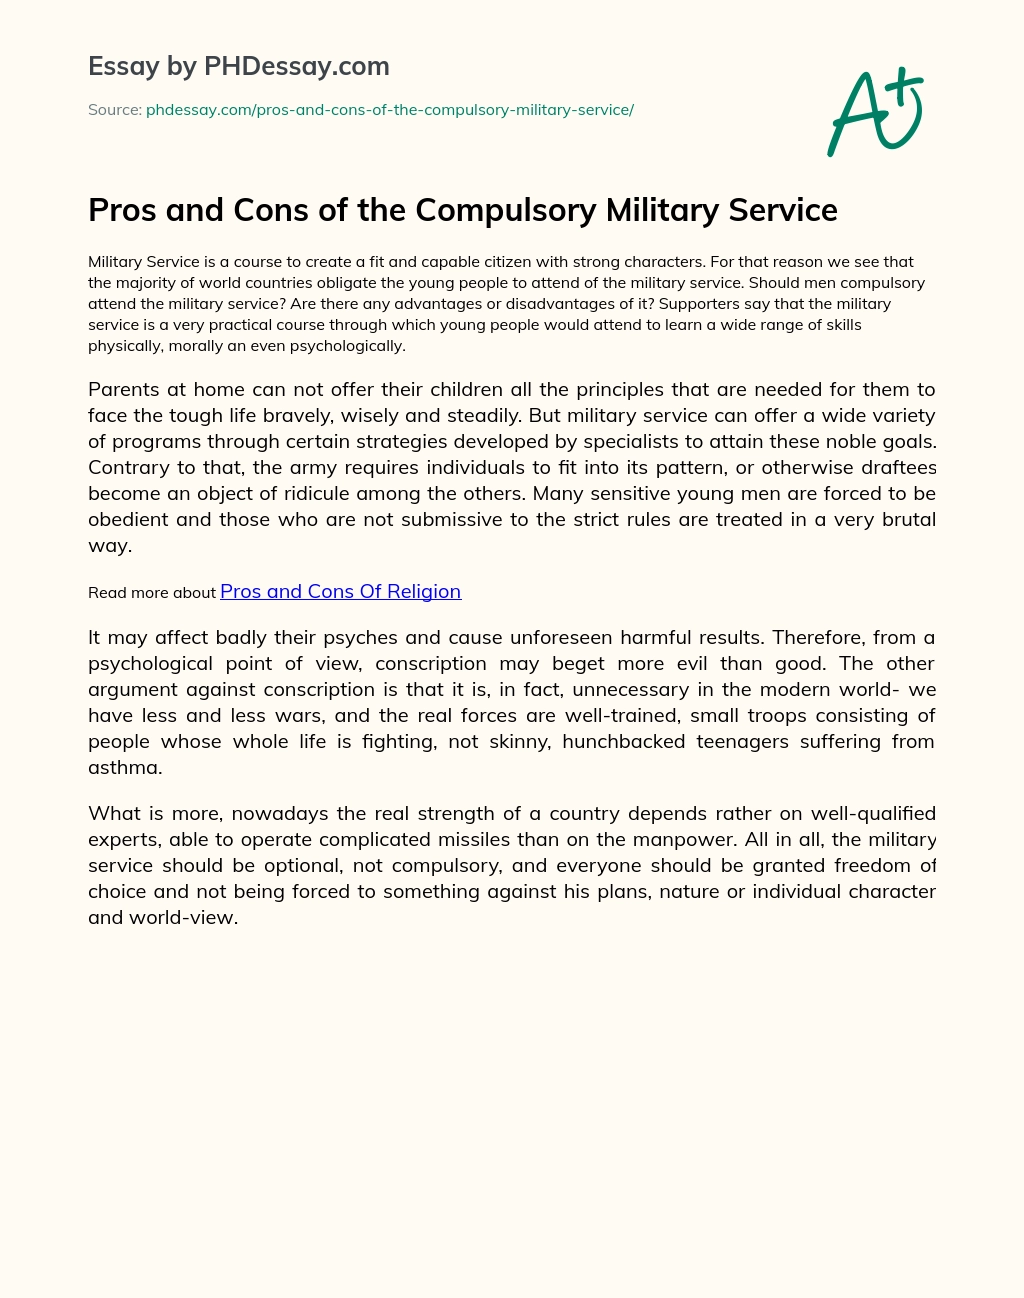 Pros and Cons of the Compulsory Military Service essay